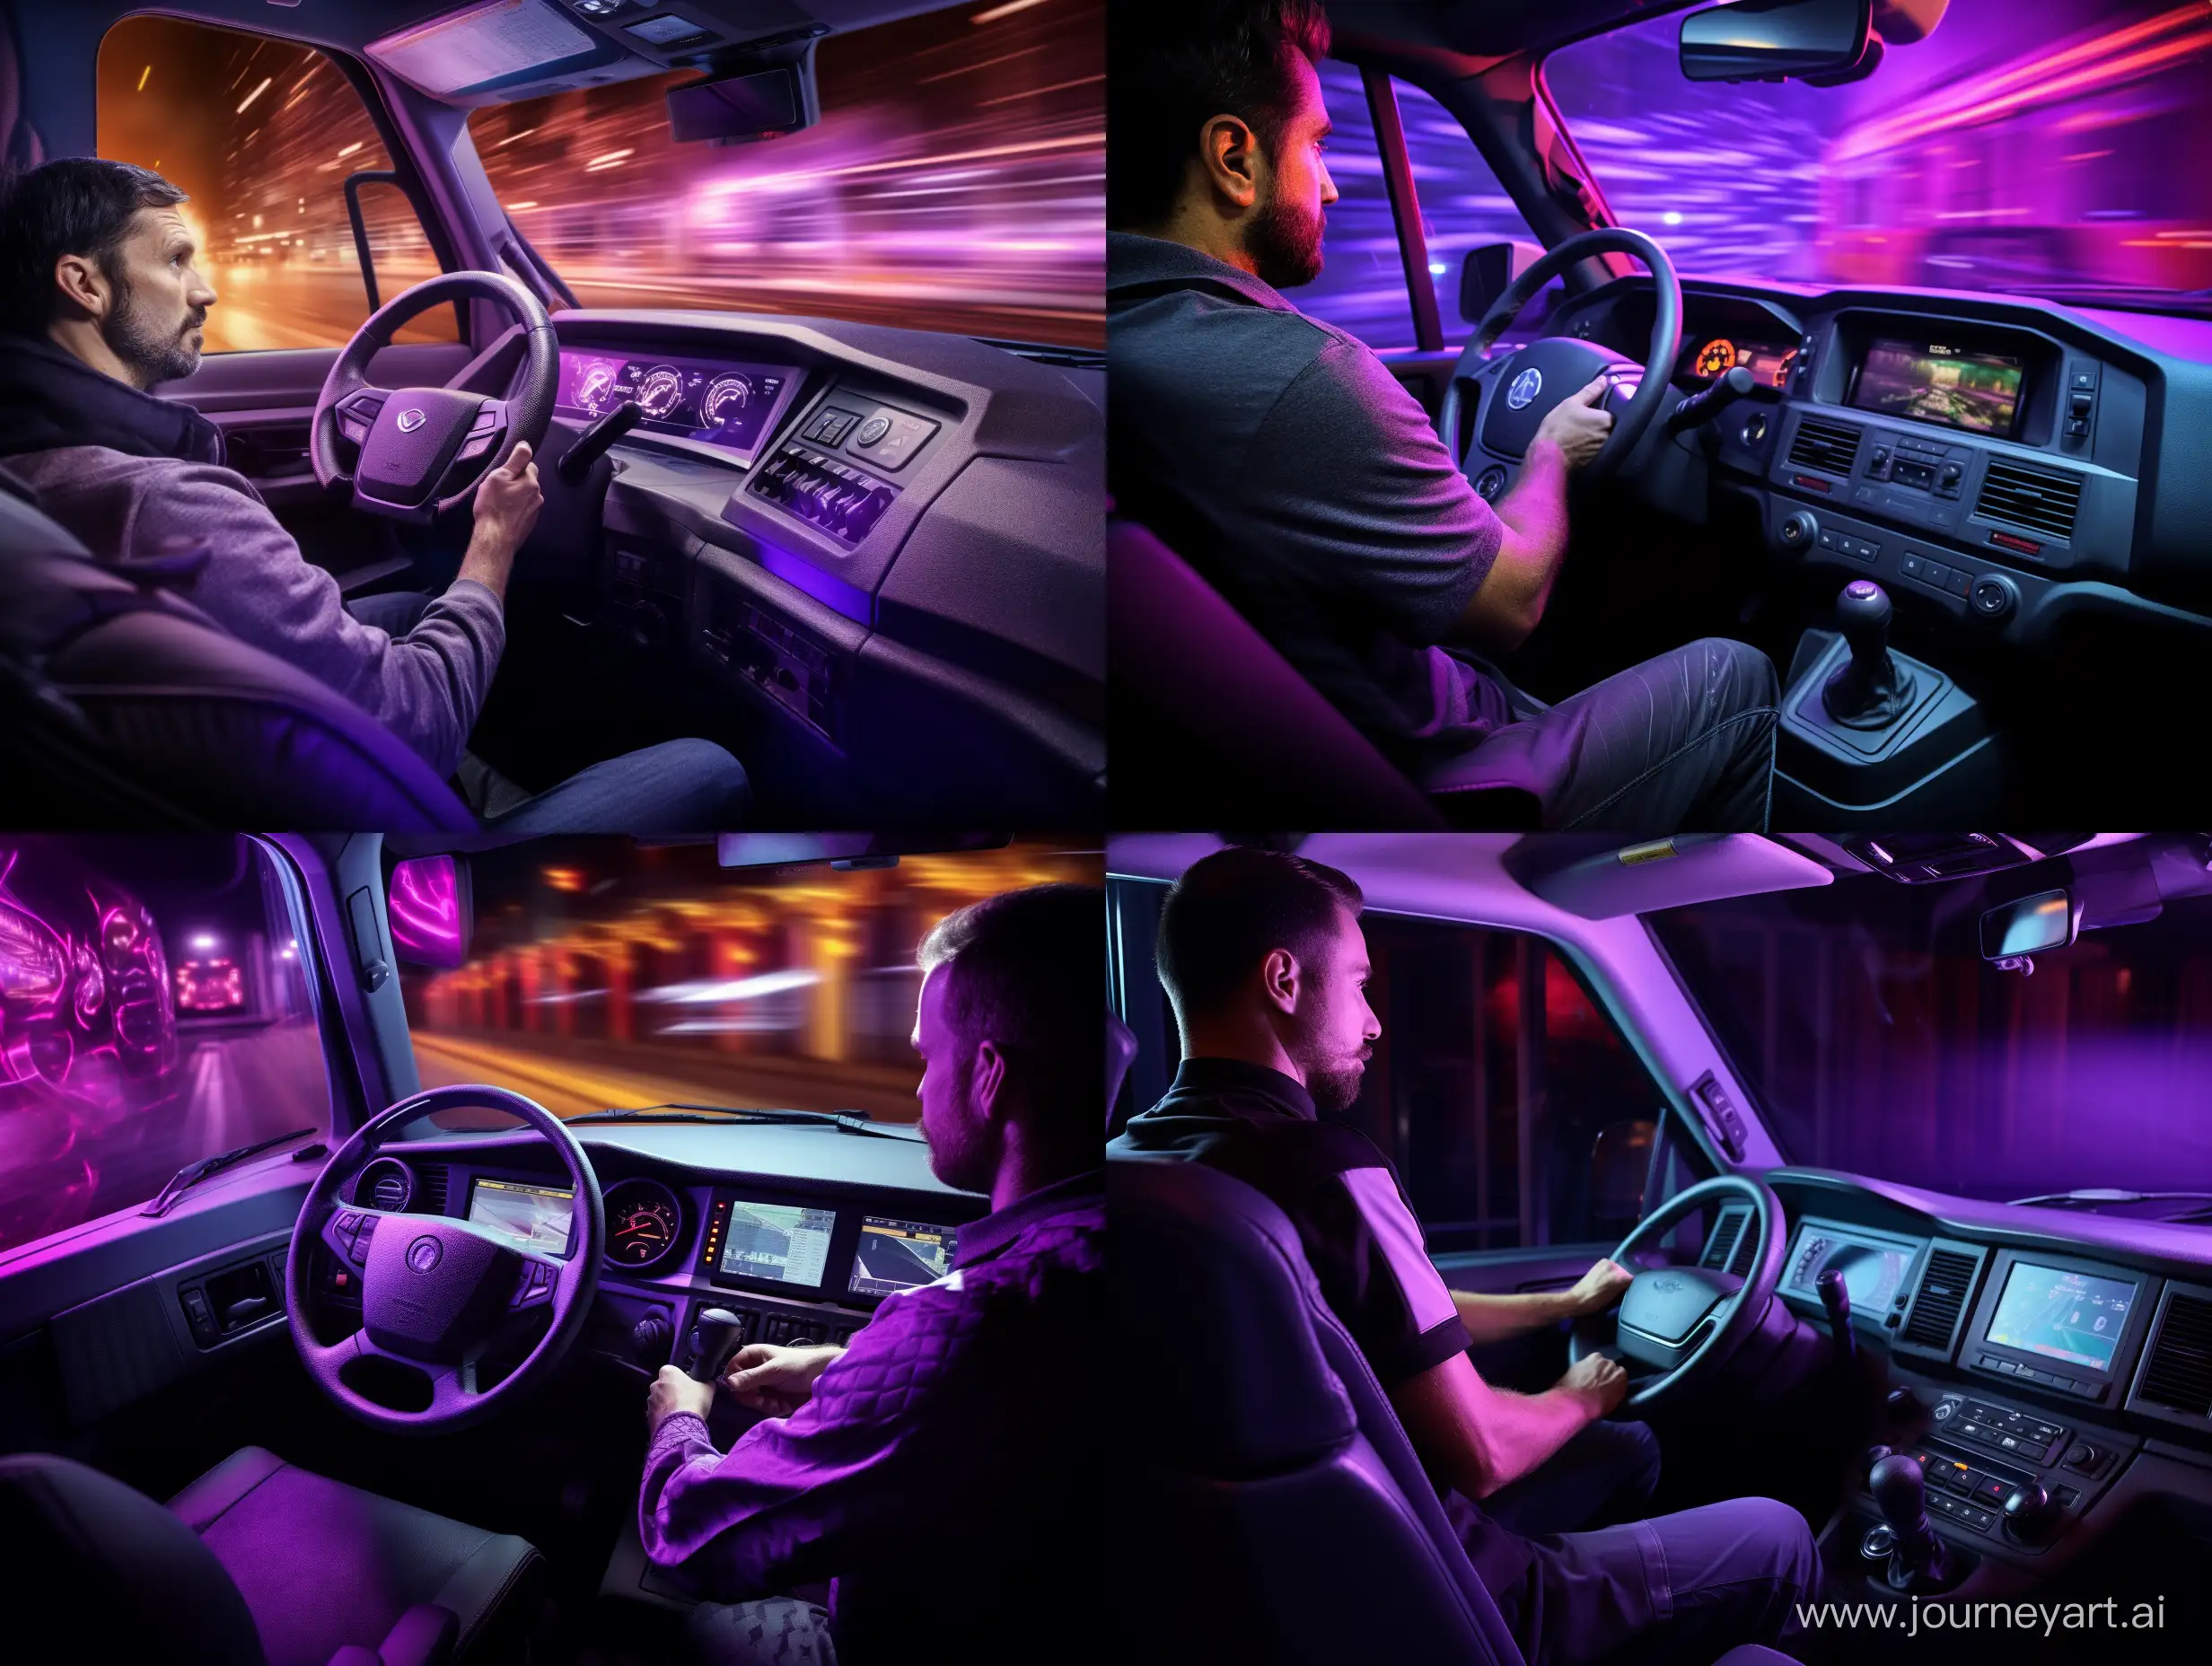 The driver holds the steering wheel, a 35-year-old man, driving iveco eurocargo, he can be seen through the windshield, front view, the iveco eurocargo truck is visible halfway, realism, purple light